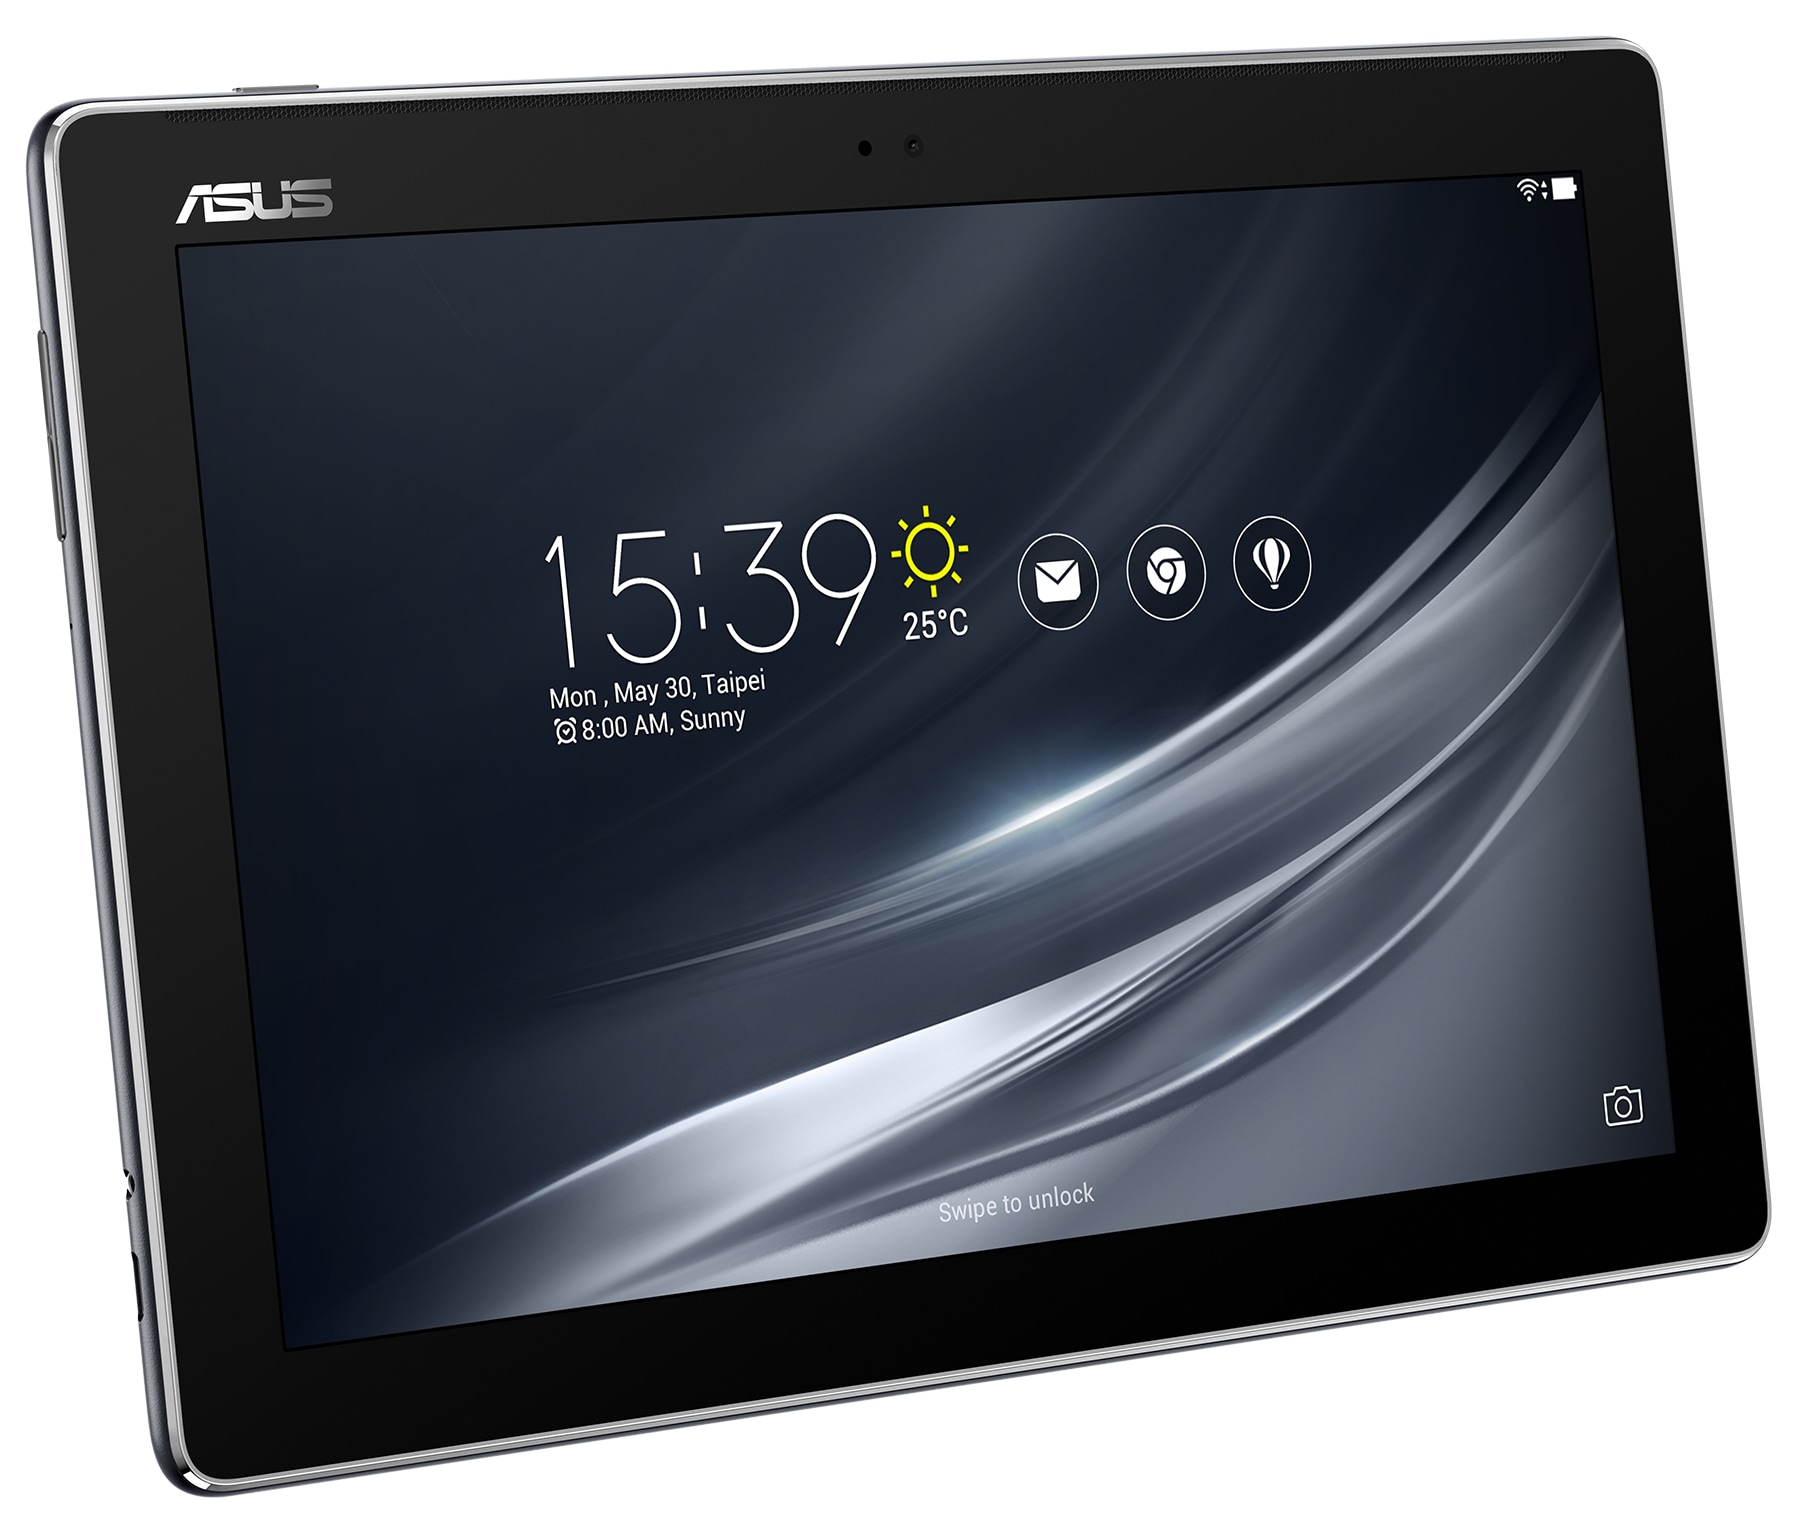 ASUS ZenPad 10 Z301MF - tablet - Android 7.0 (Nougat) - 16 GB - 10.1"